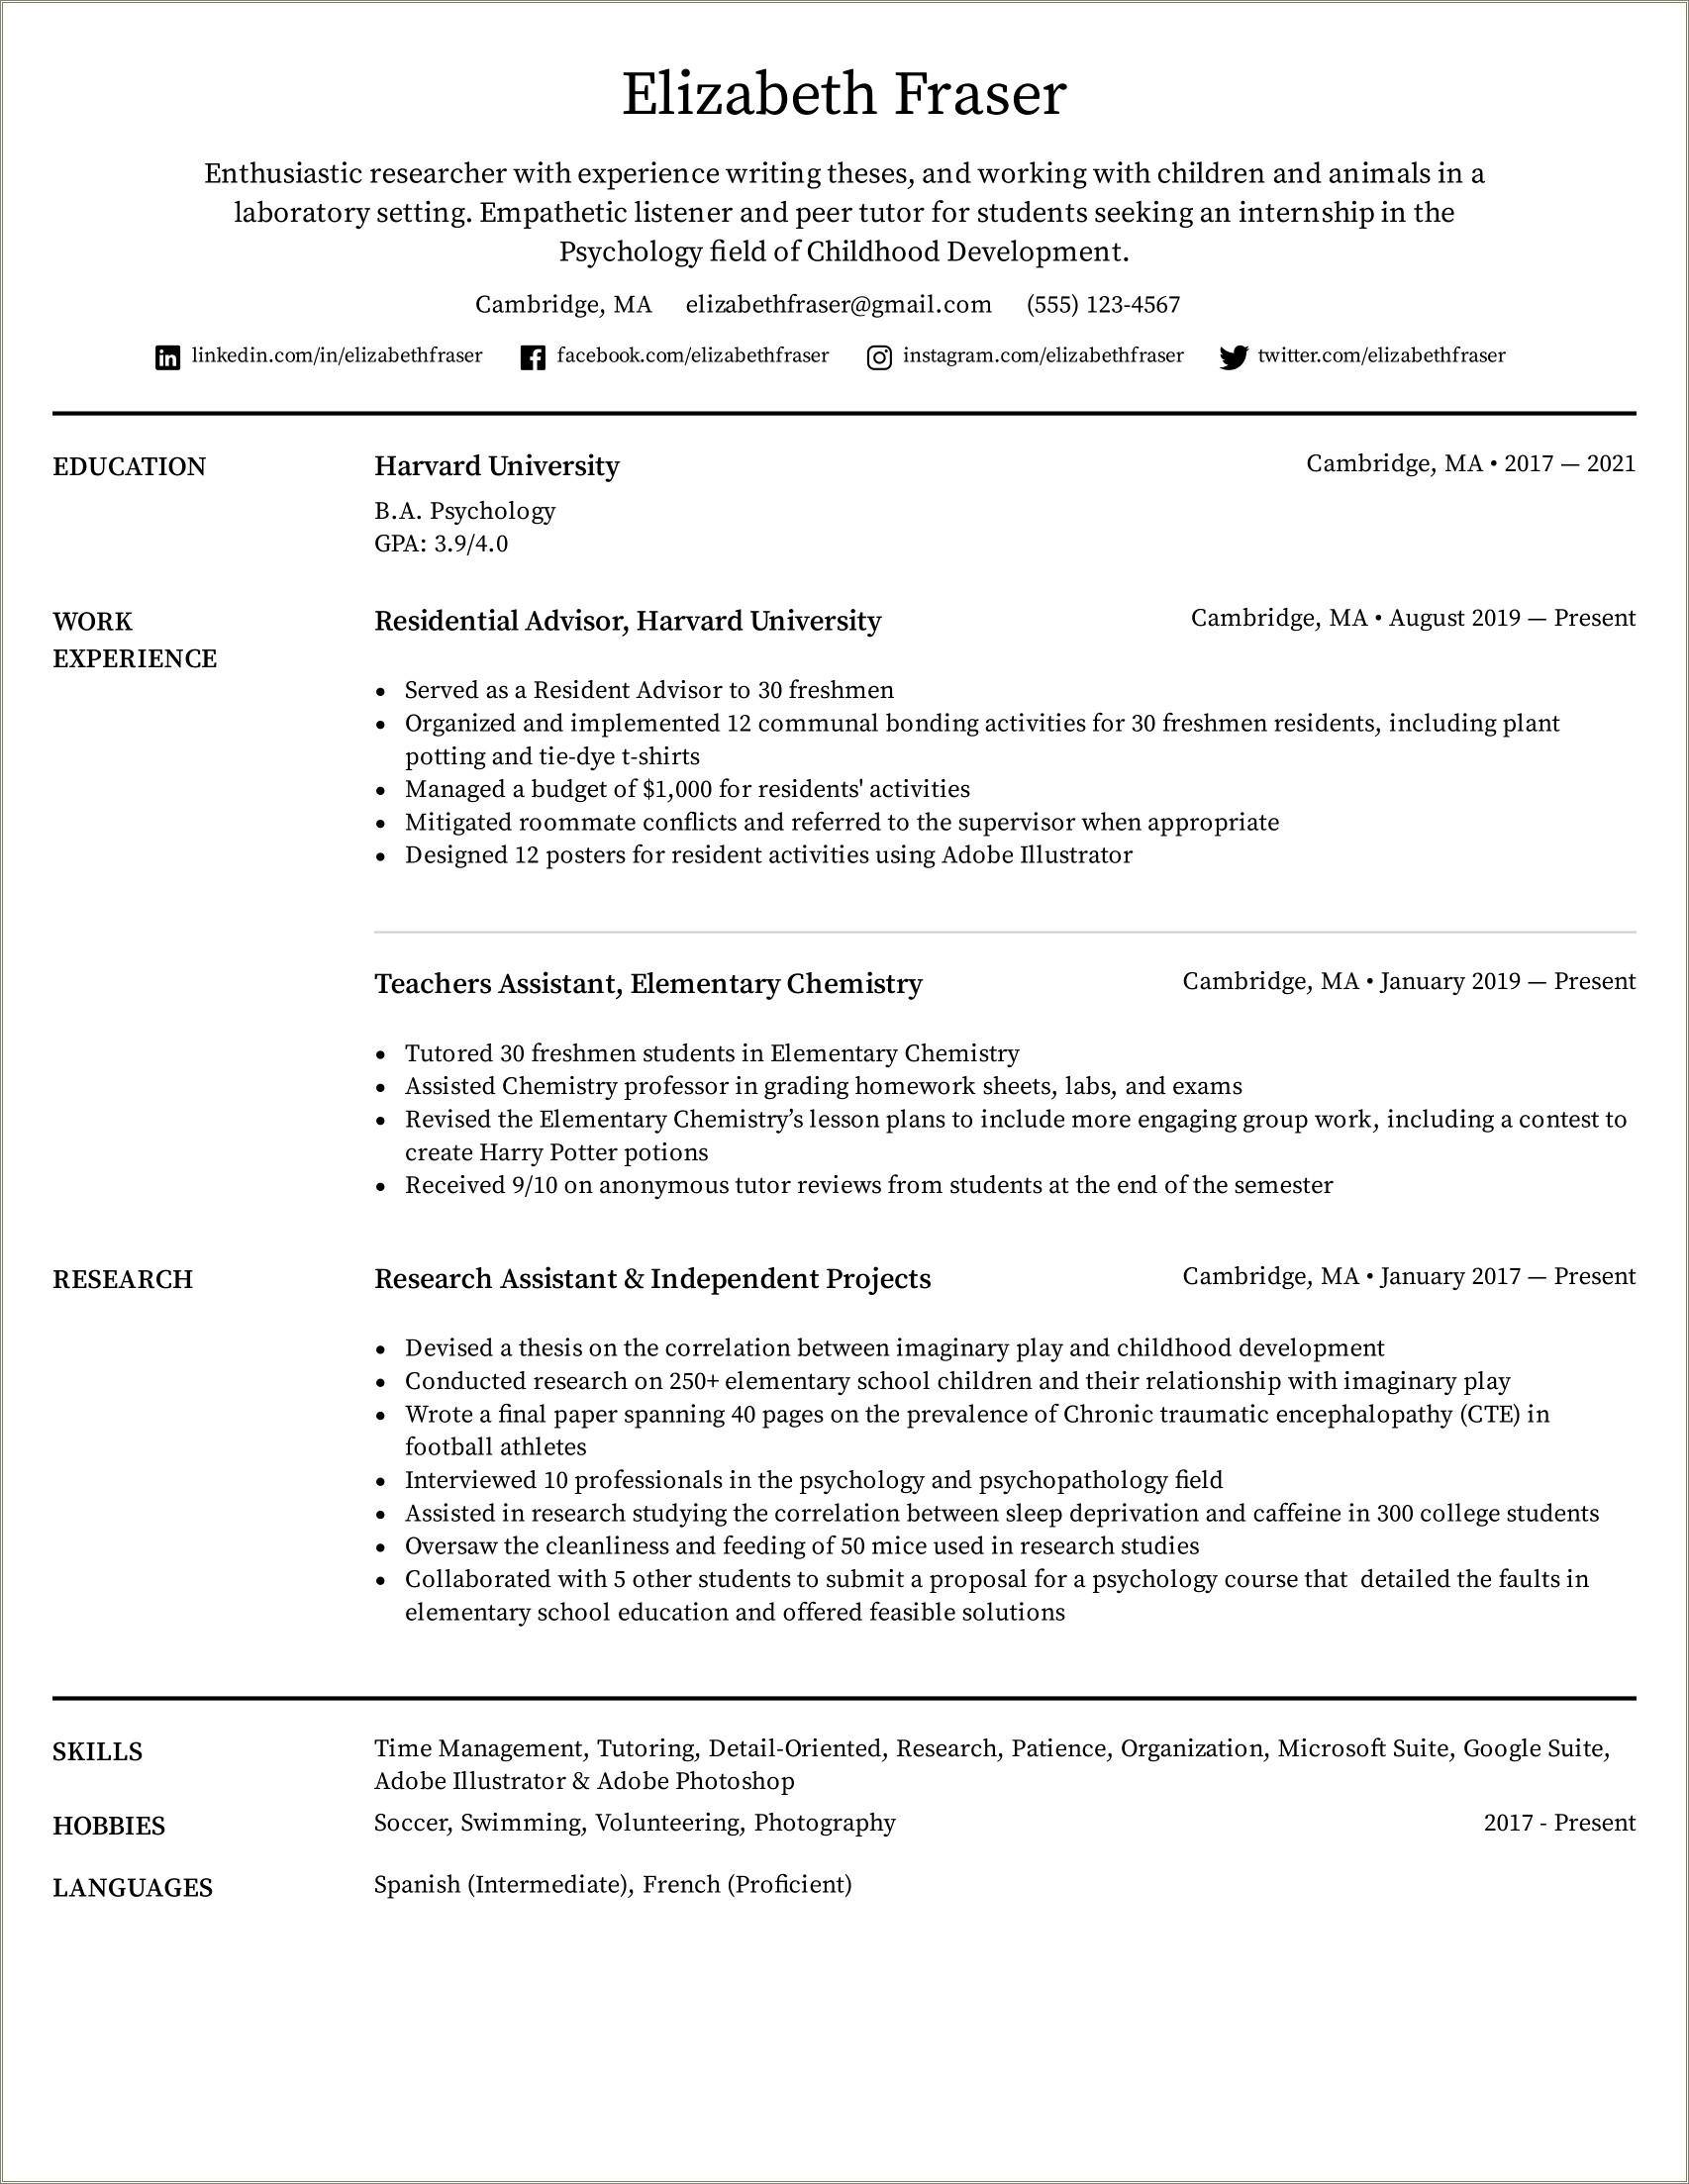 Resume Objective For A Warehouse Job